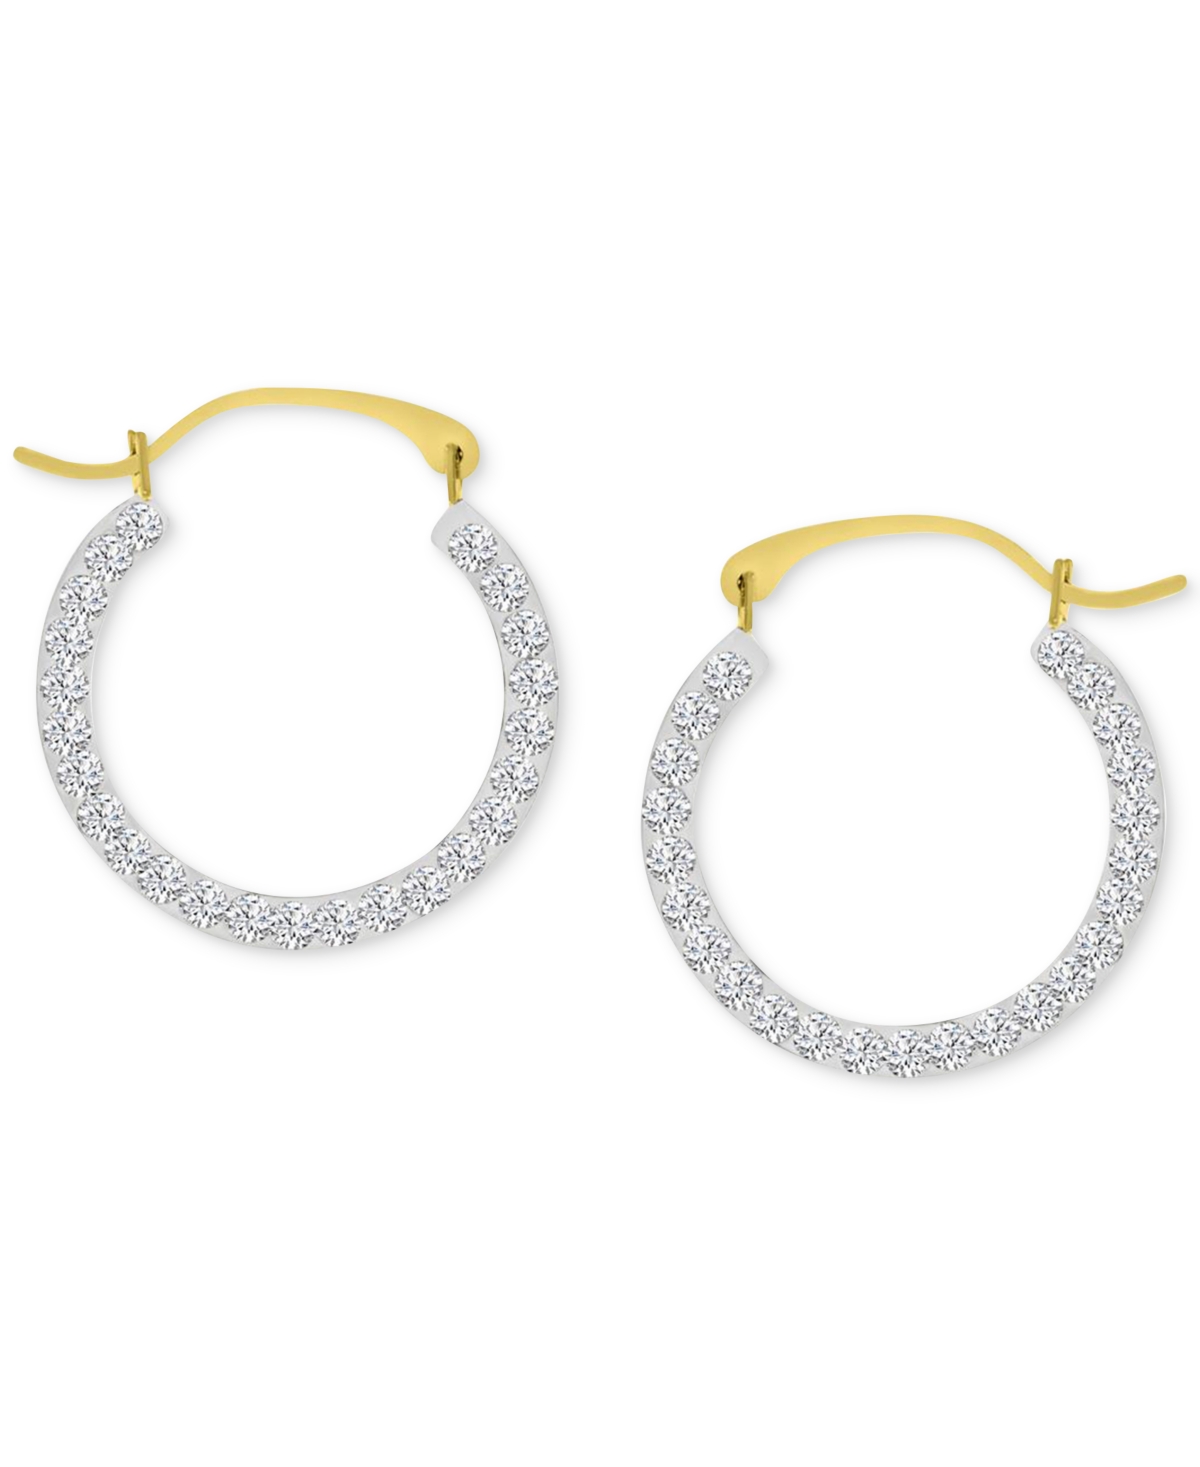 Macy's Crystal Pave Small Round Hoop Earrings In 10k Gold, 0.75"